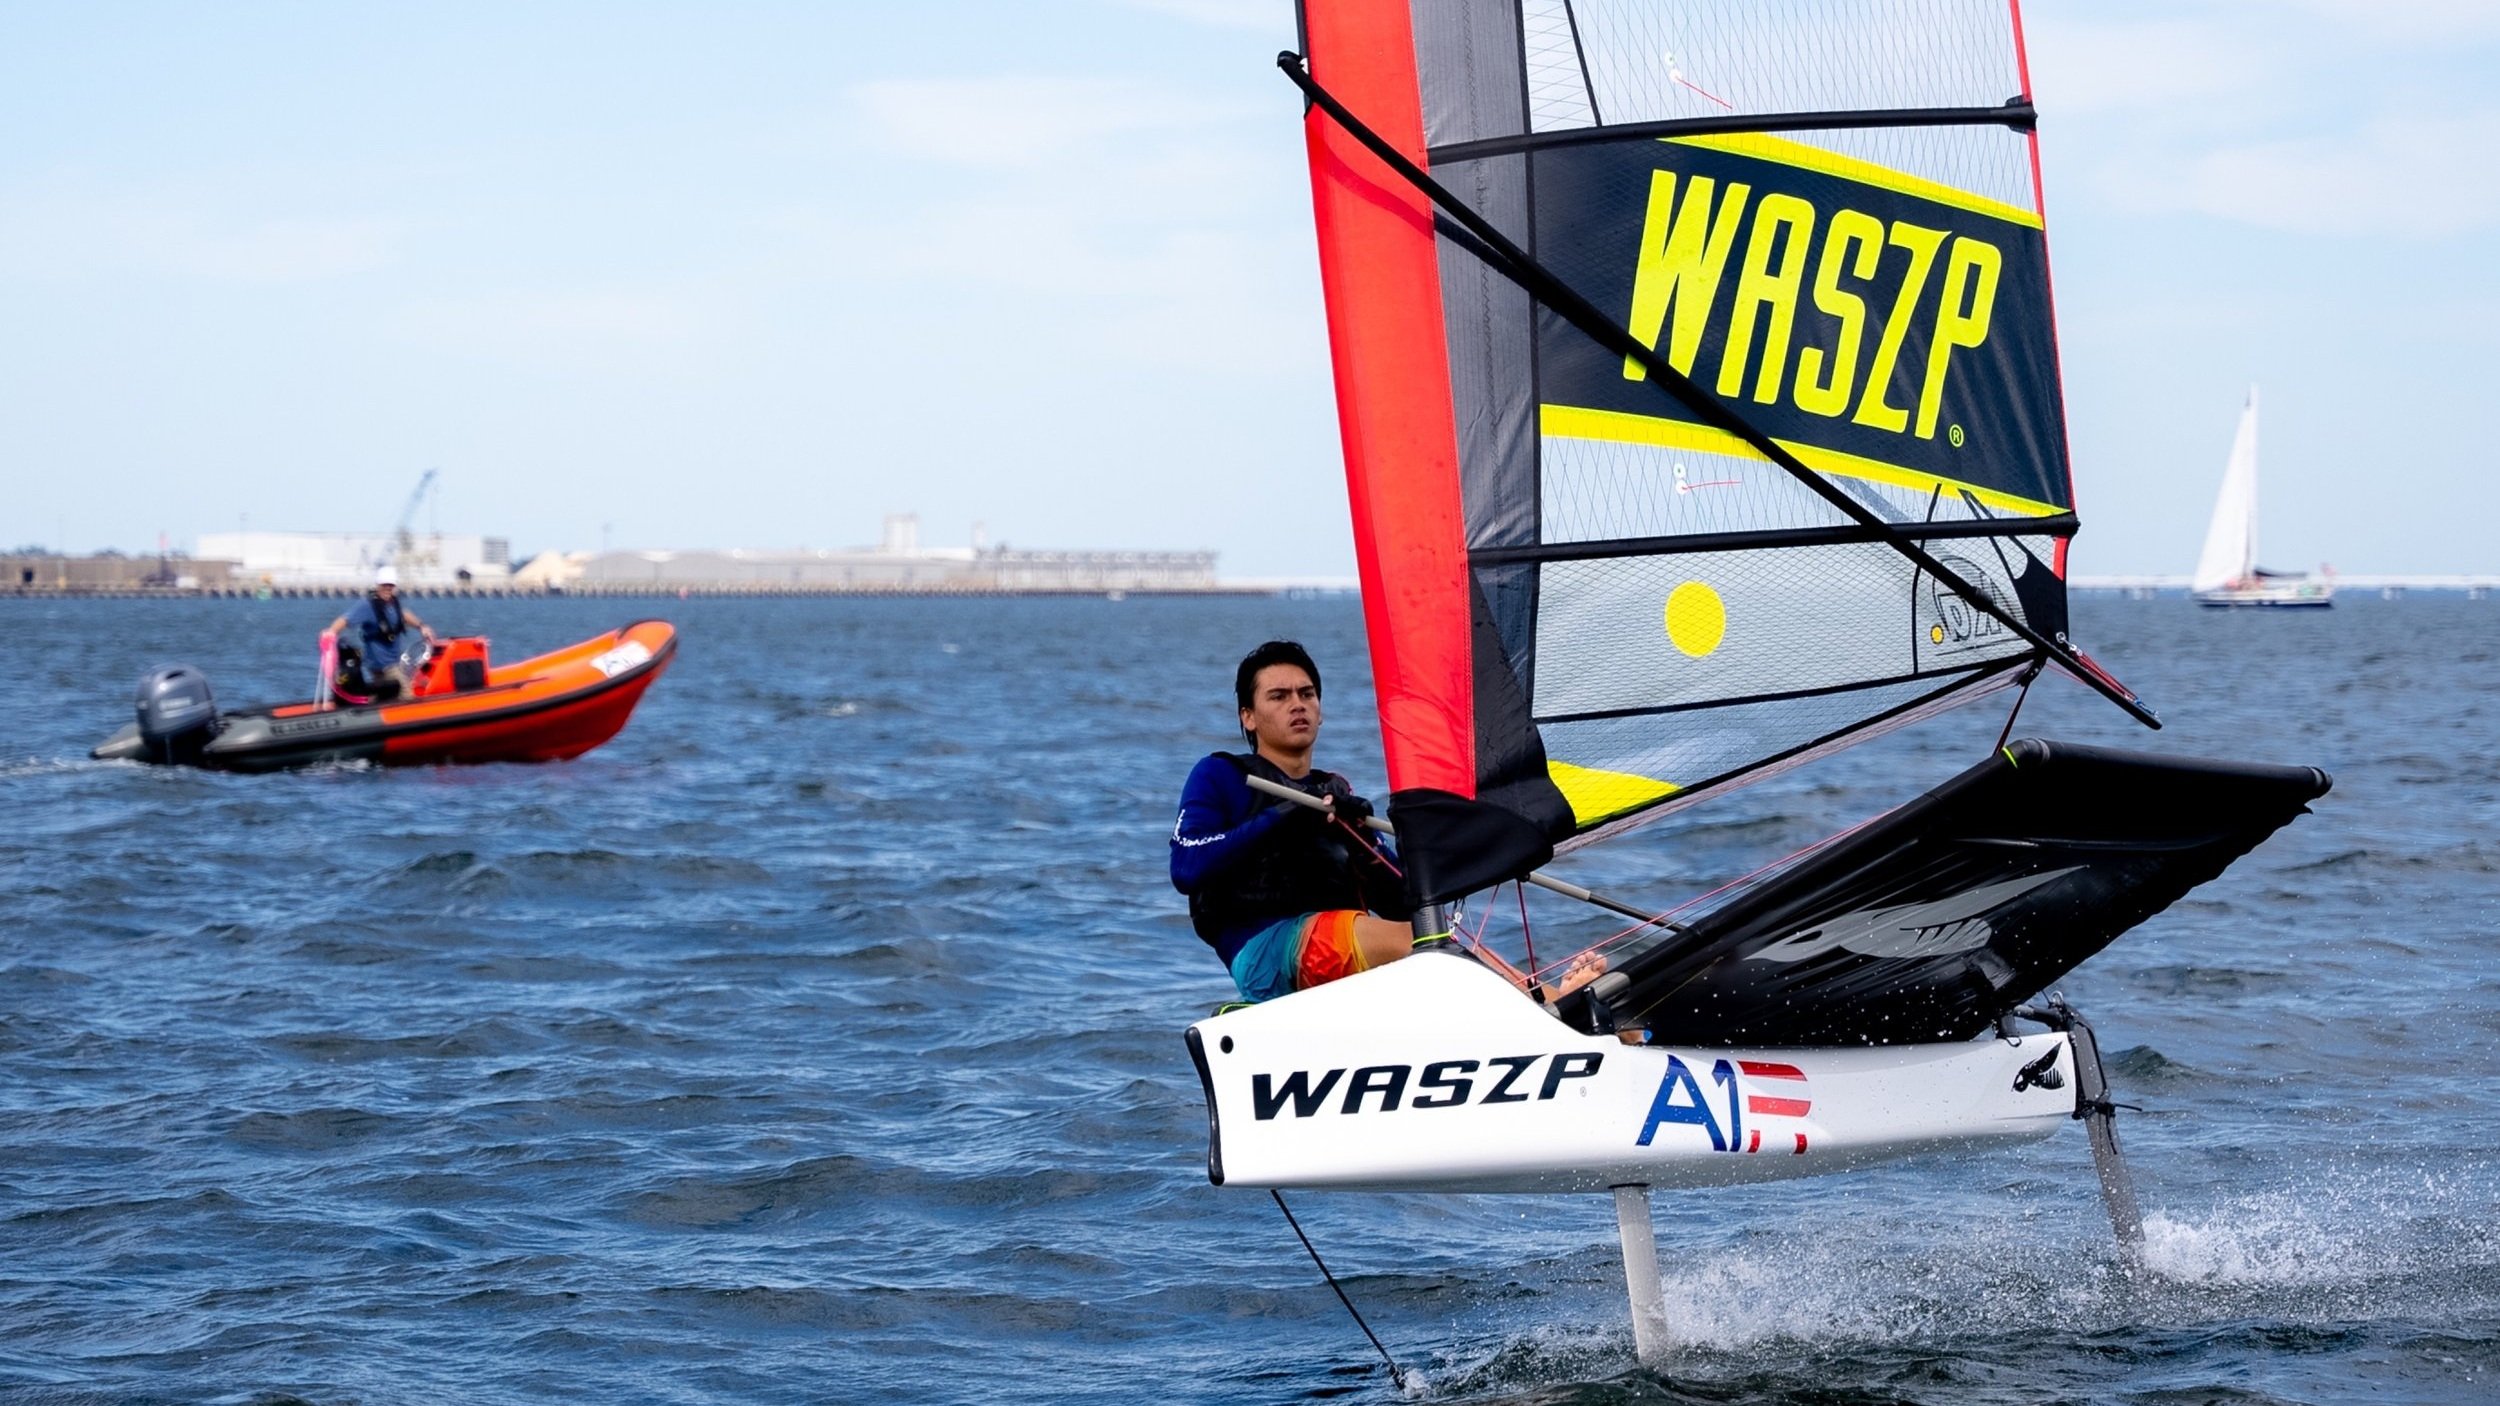 America One Racing Foiling Camp